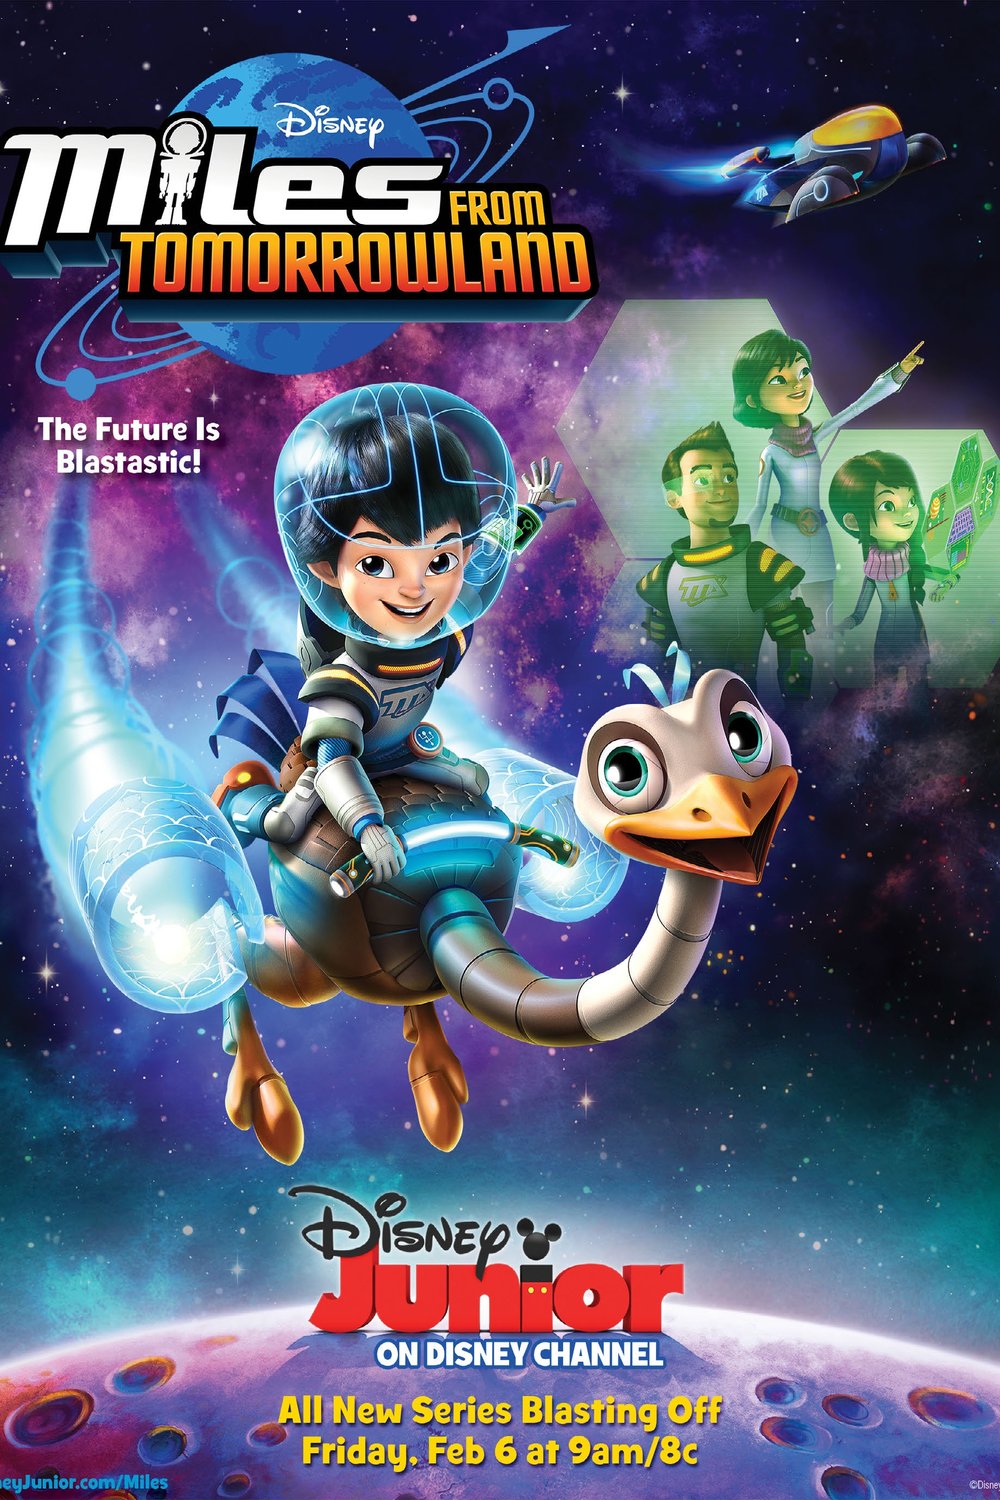 L'affiche du film Miles from Tomorrowland